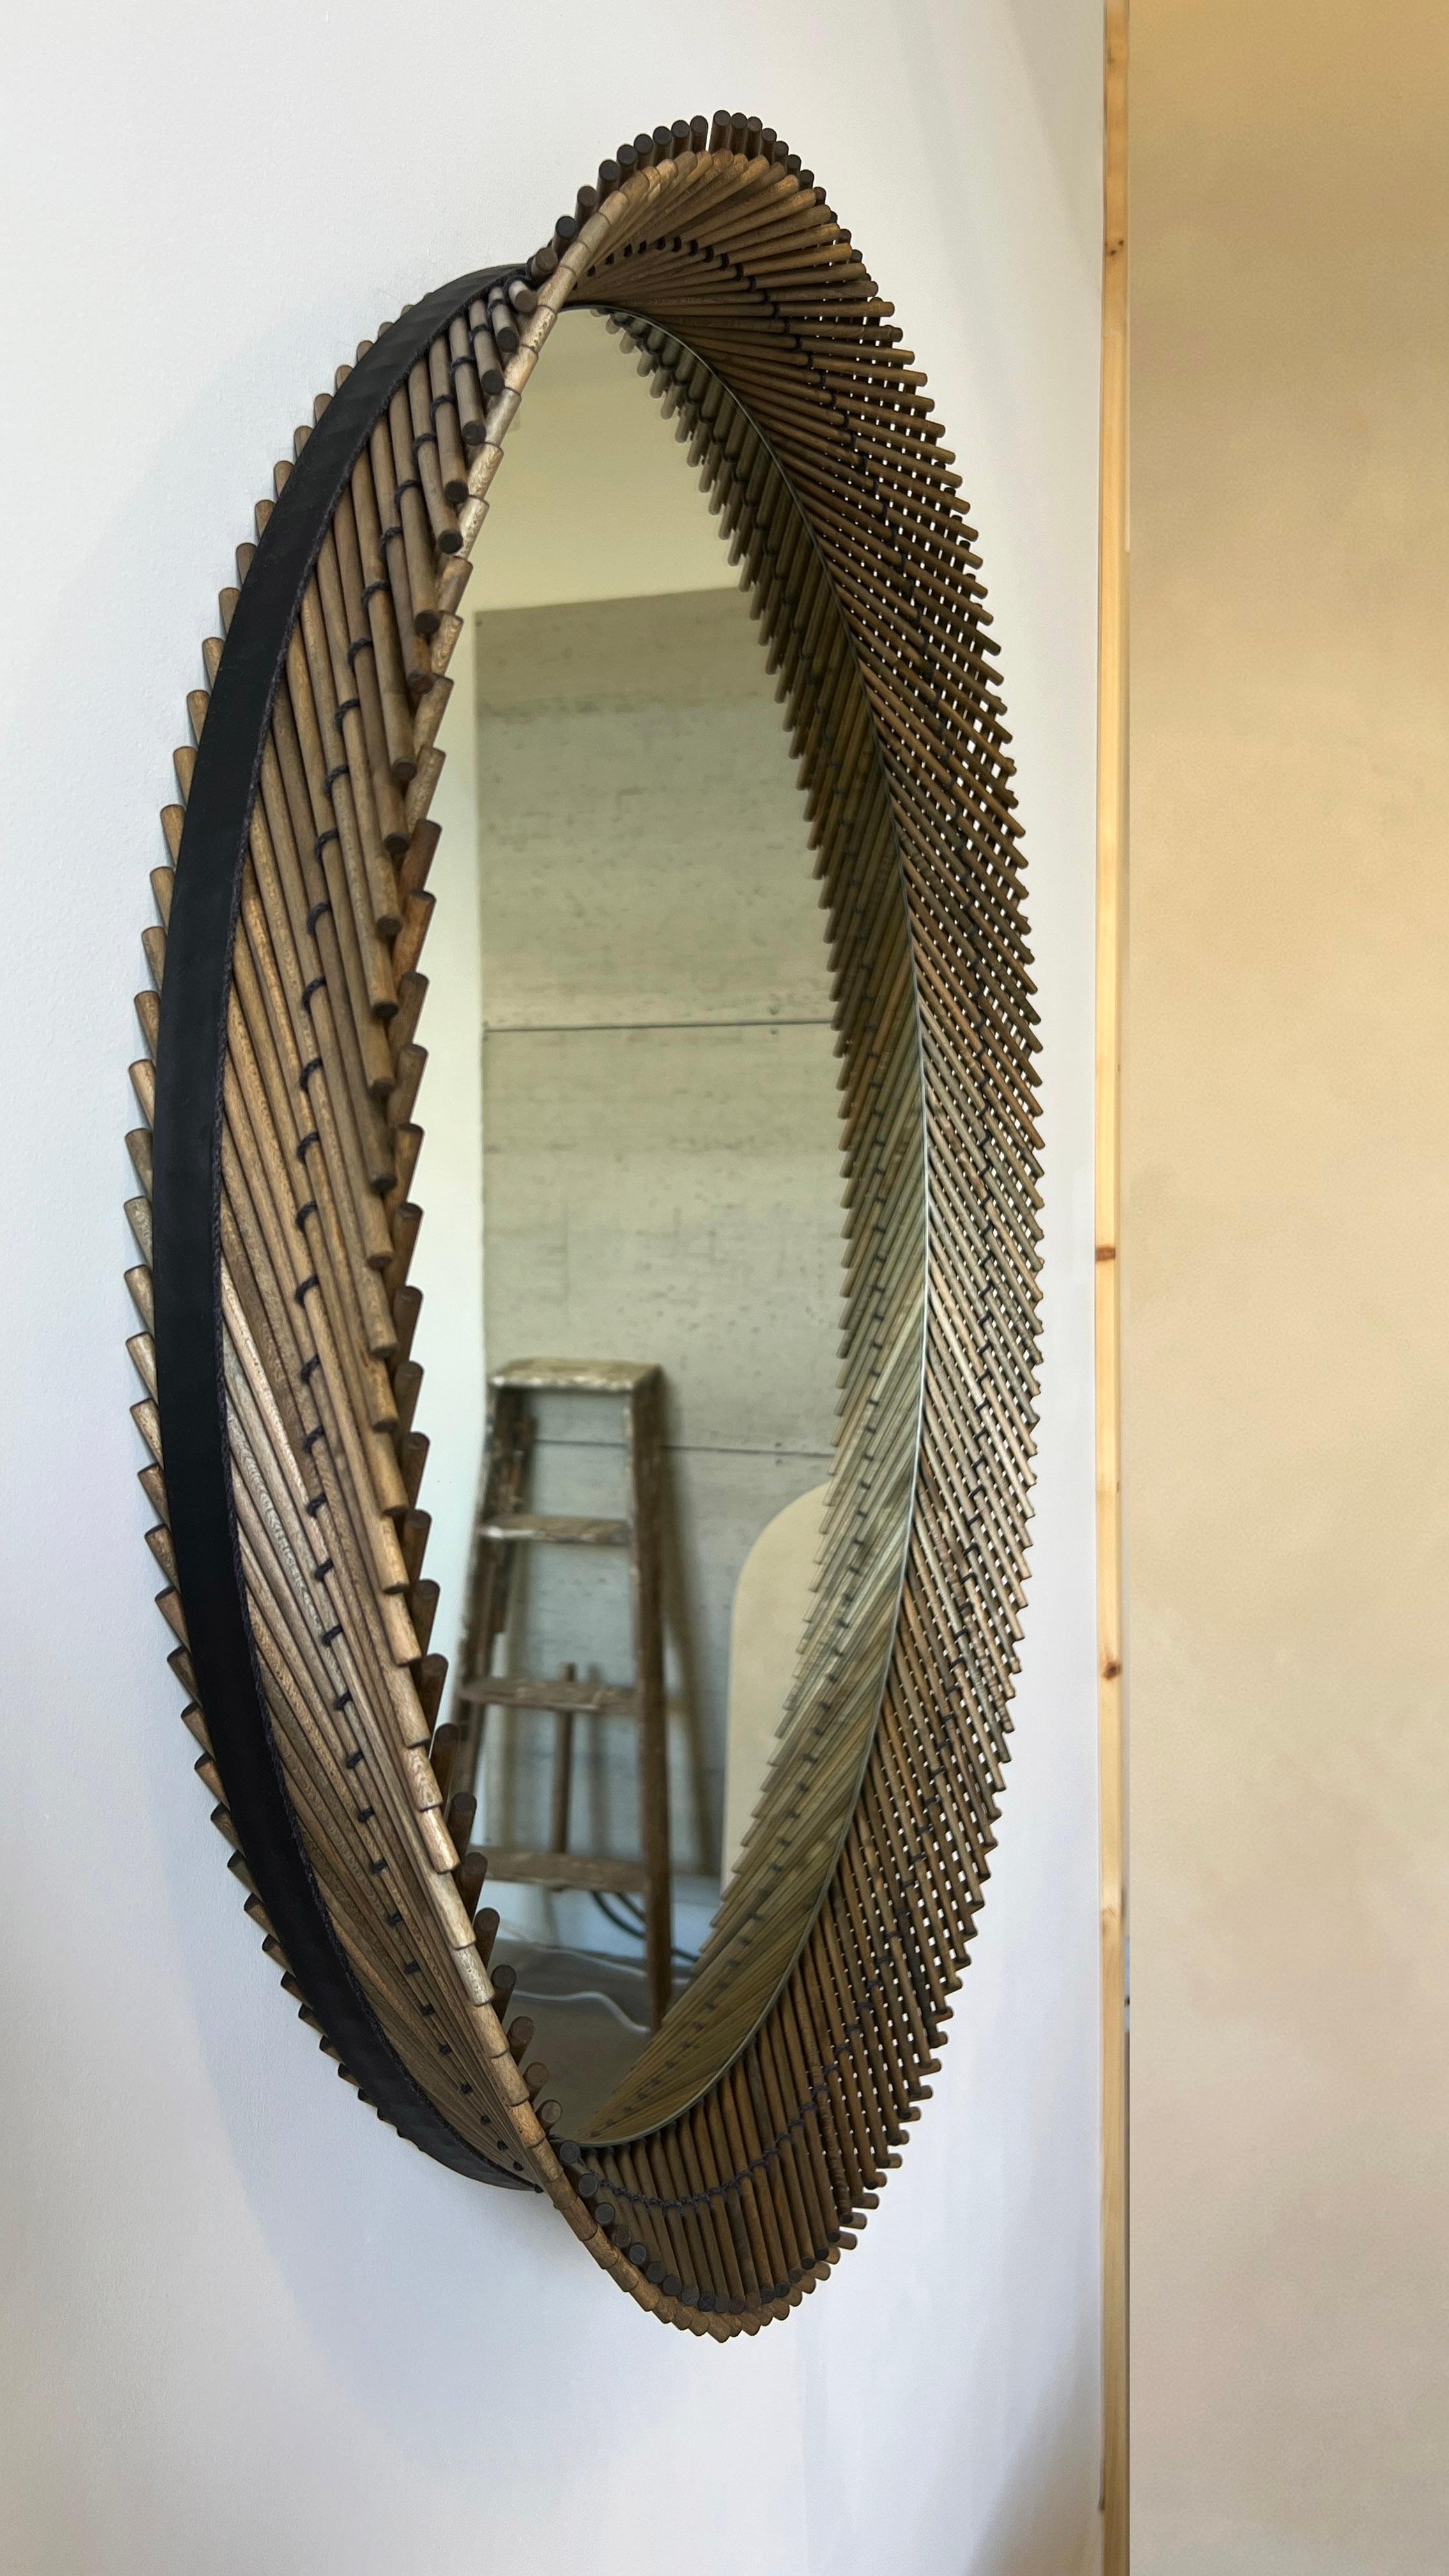 Mooda Round Mirror 30 / Oxidized Maple Wood, Clear Mirror by INDO- In New Condition For Sale In Rumford, RI